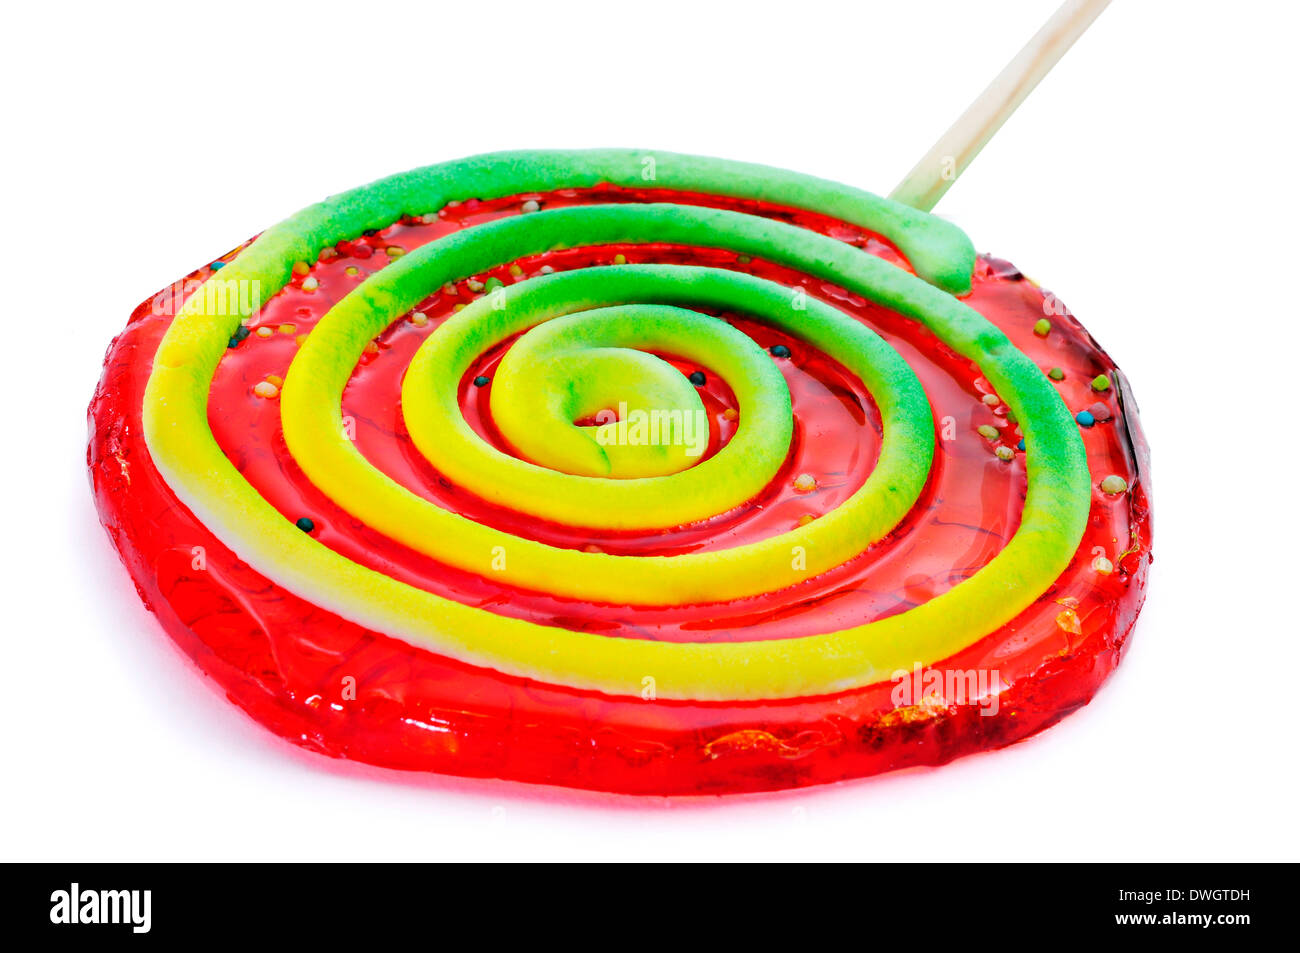 a colorful lollipop with a spiral pattern on a white background Stock Photo